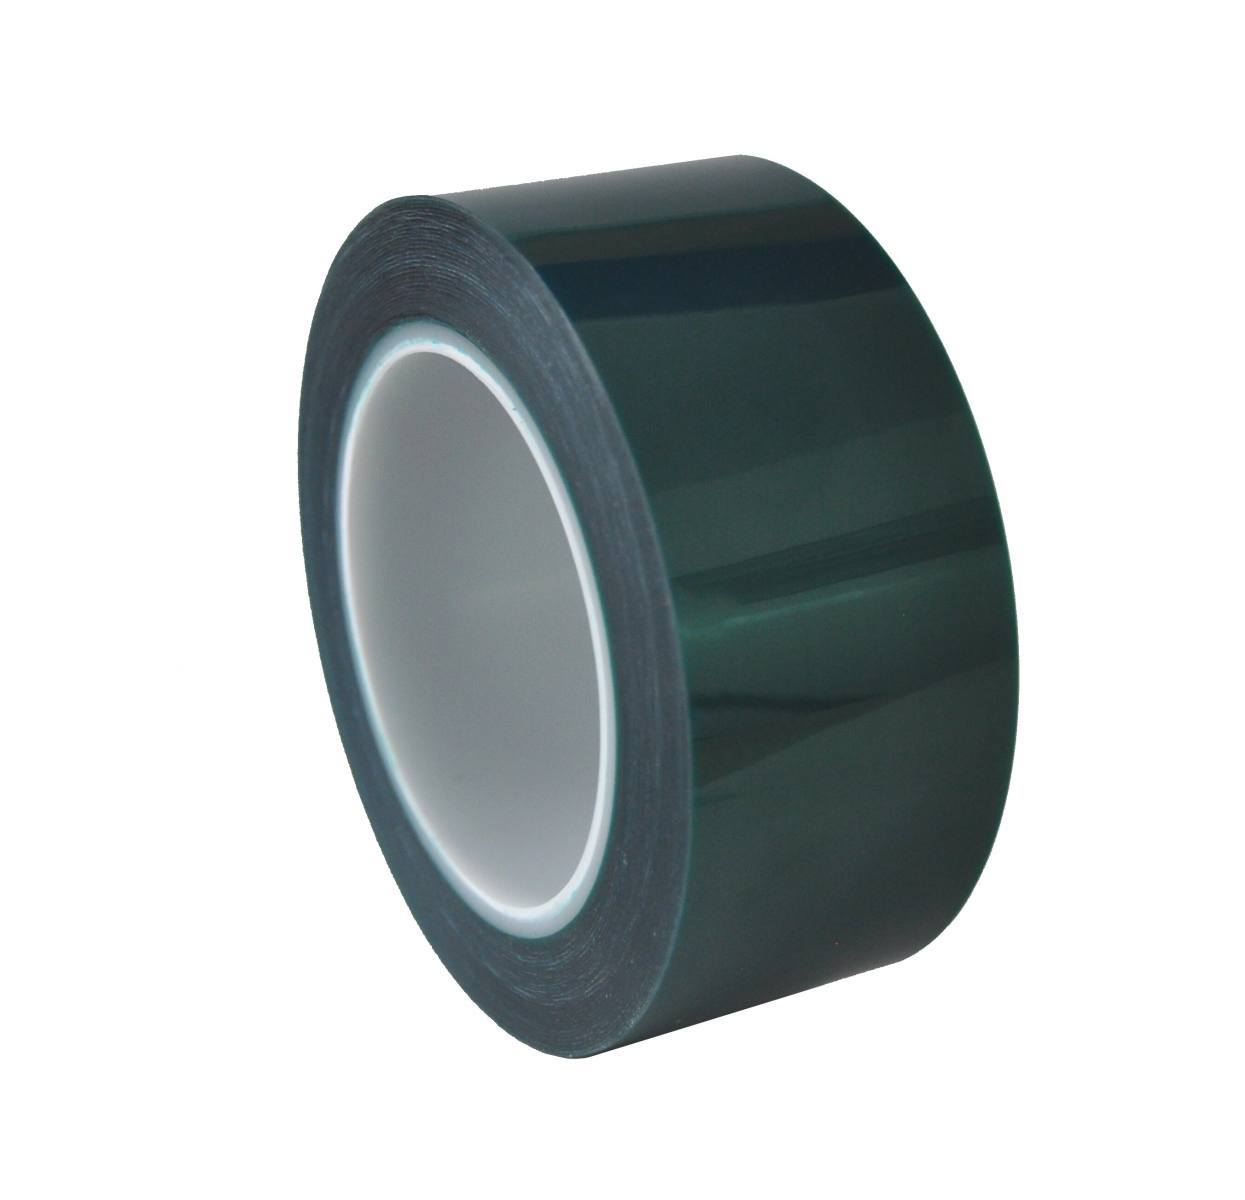 S-K-S 208G polyester adhesive tape, 75mmx66m, green